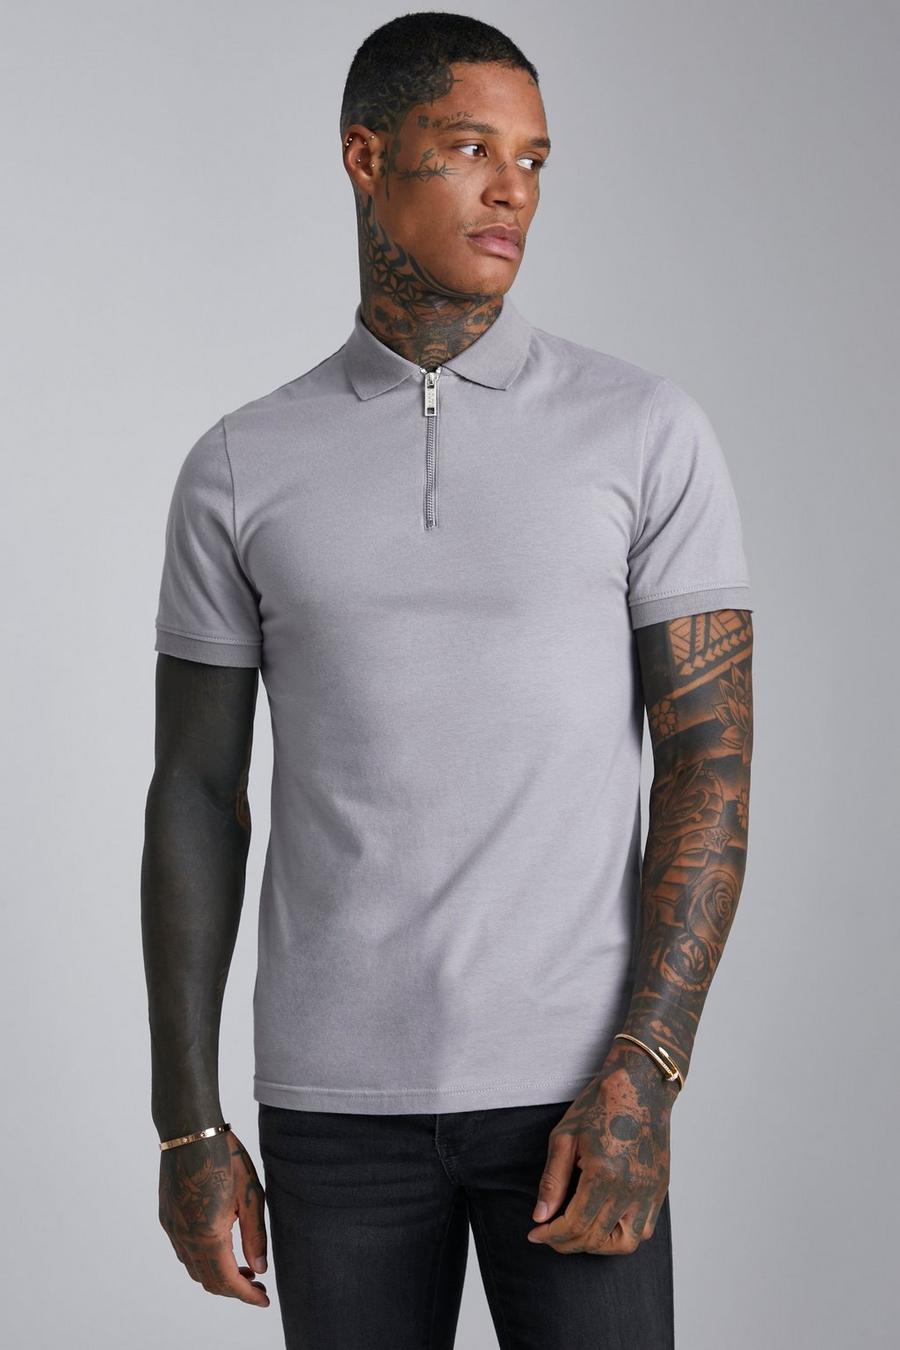 Charcoal grey Muscle Fit Short Sleeve Zip Polo